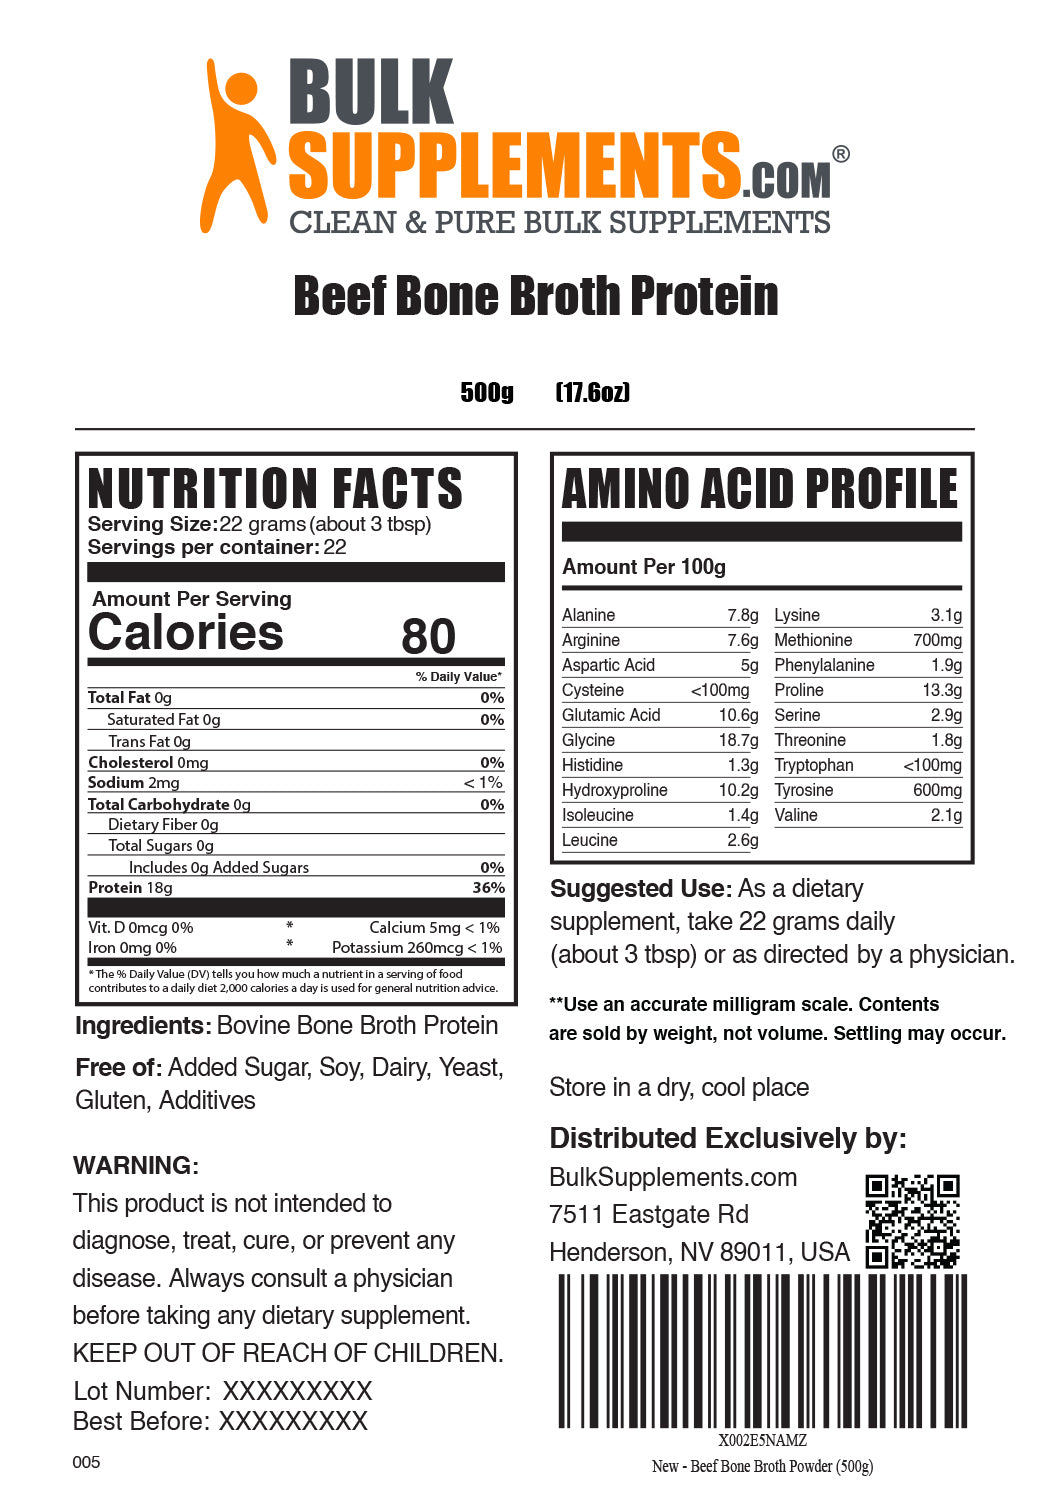 Beef Bone Broth Protein Supplement label, Ingredients  and Serving Size 